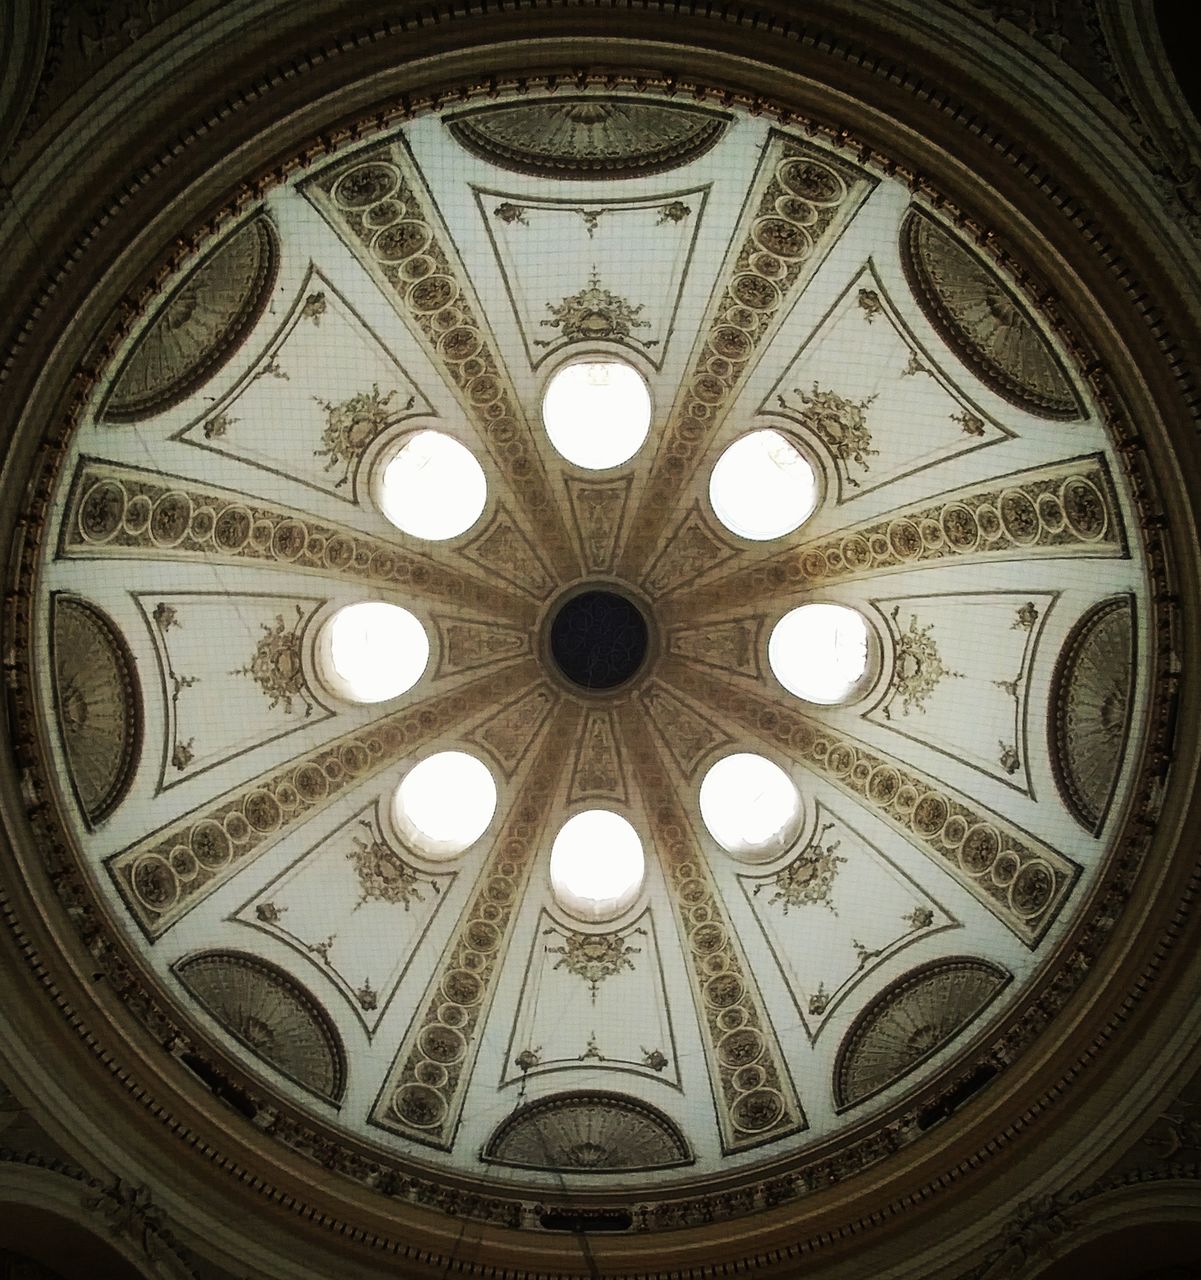 LOW ANGLE VIEW OF ILLUMINATED CEILING OF DOME